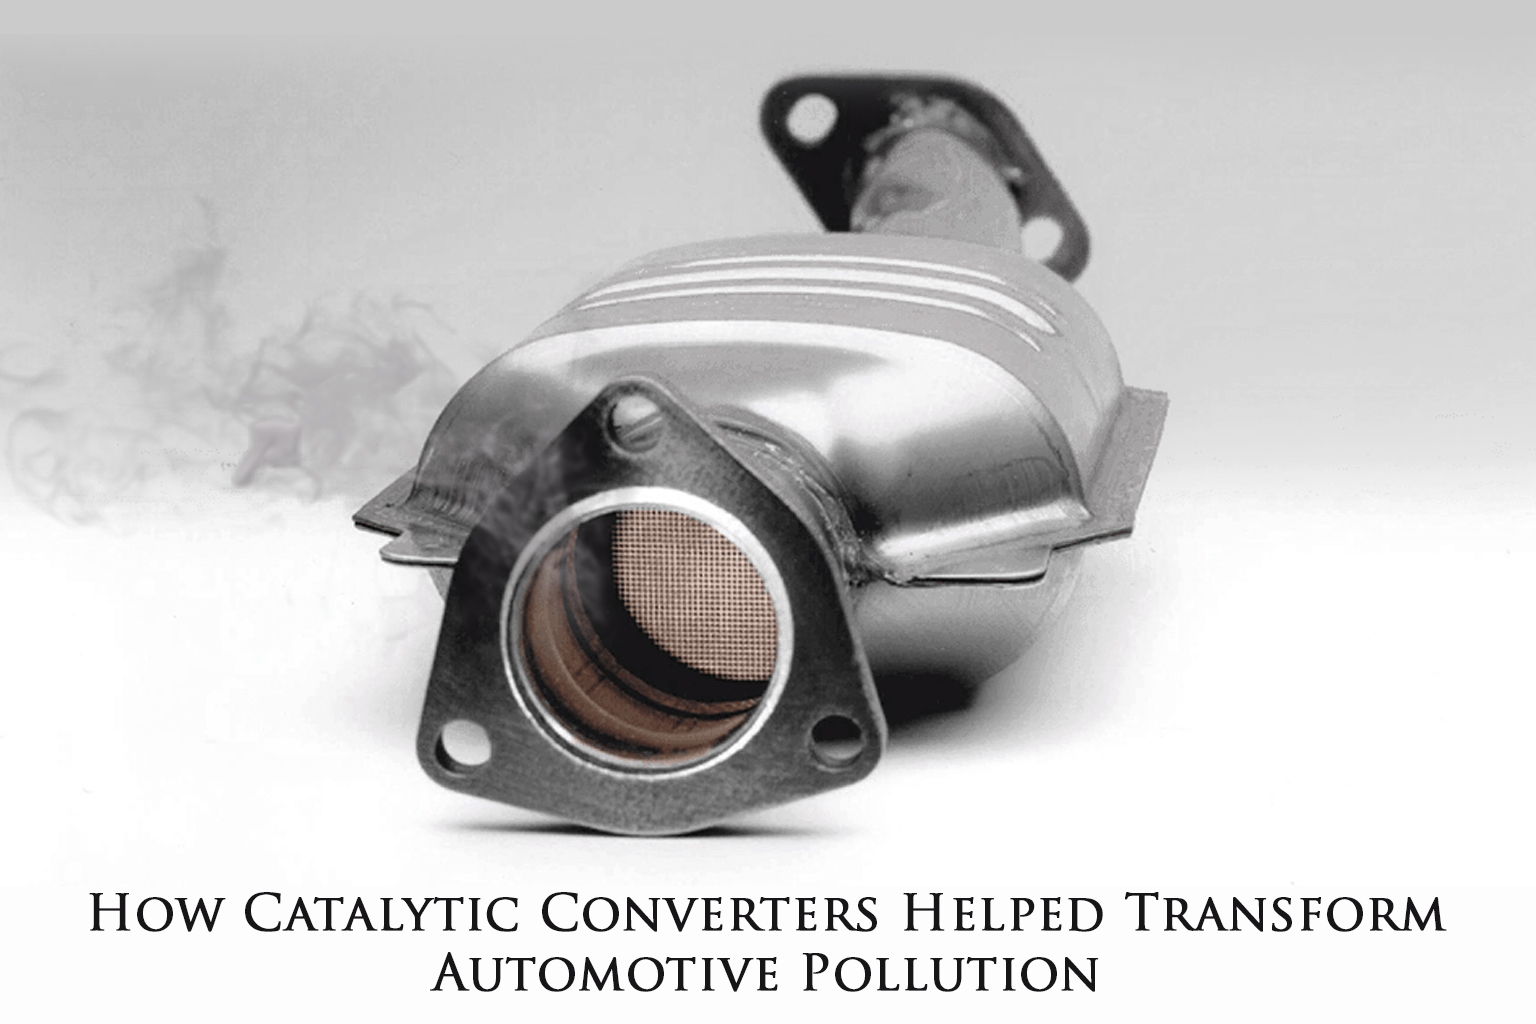 How Catalytic Converters Helped Transform Automotive Pollution